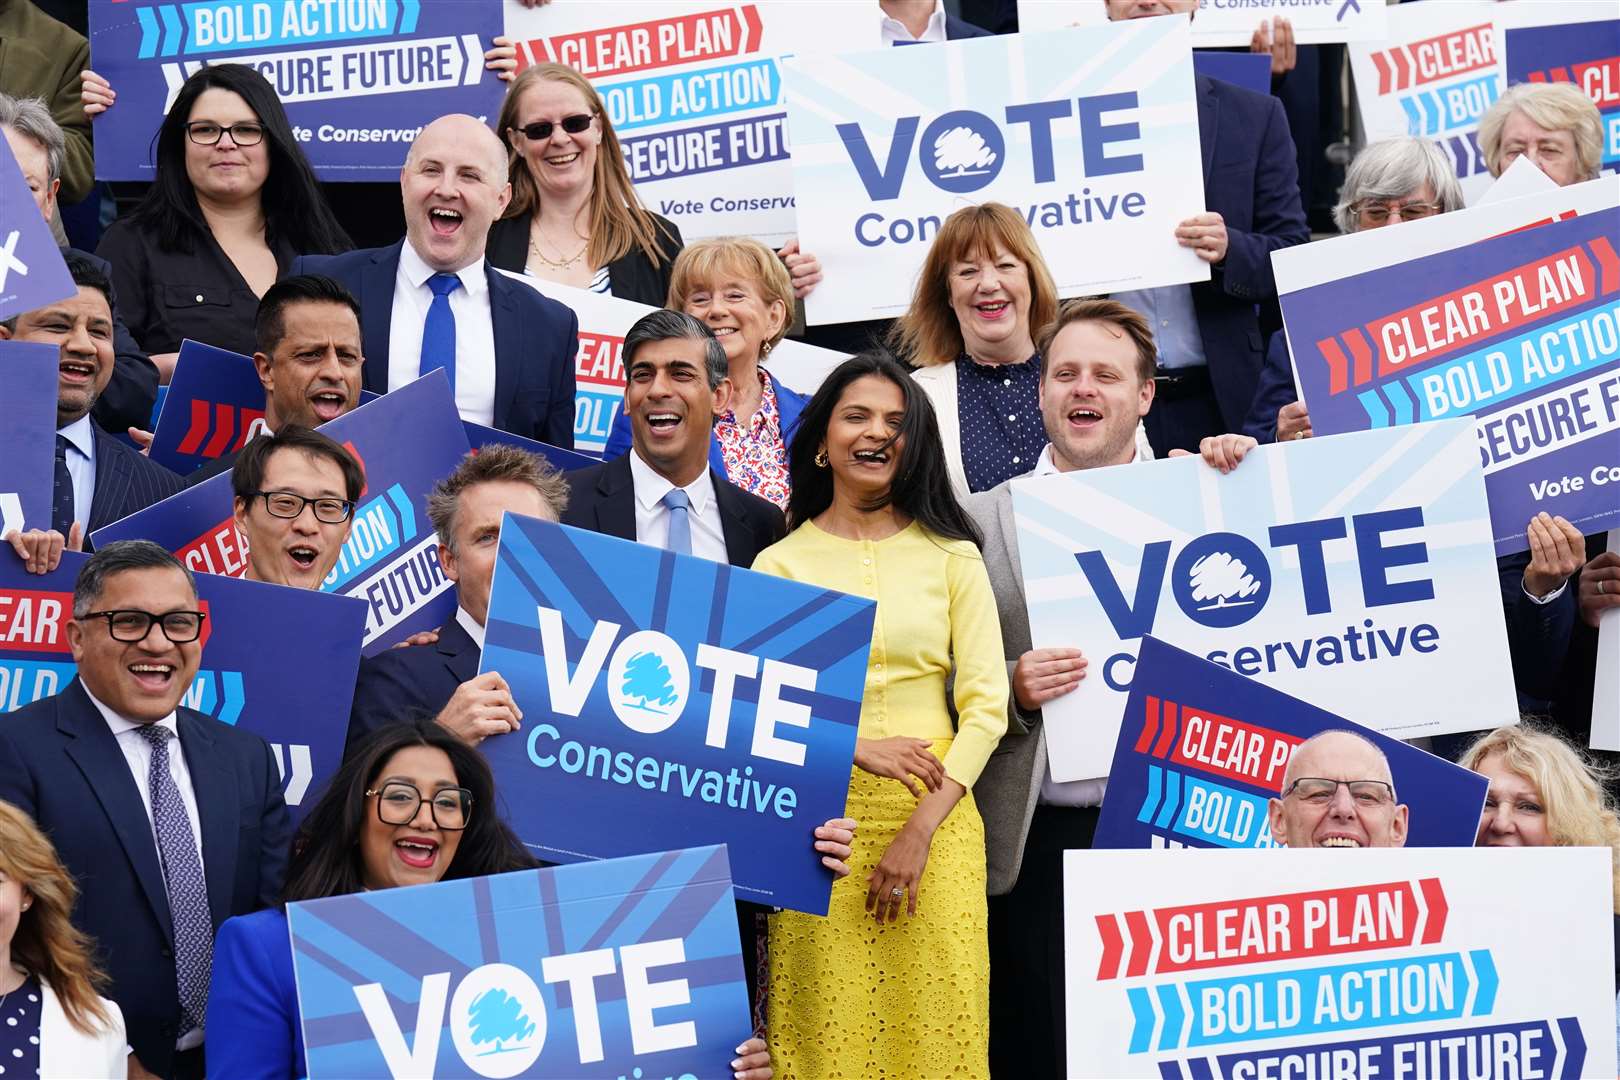 Rishi Sunak in a suit and his wife Akshata Murty in a yellow dress surrounded by campaigners holding ‘vote Conservative’ signs (James Manning/PA)